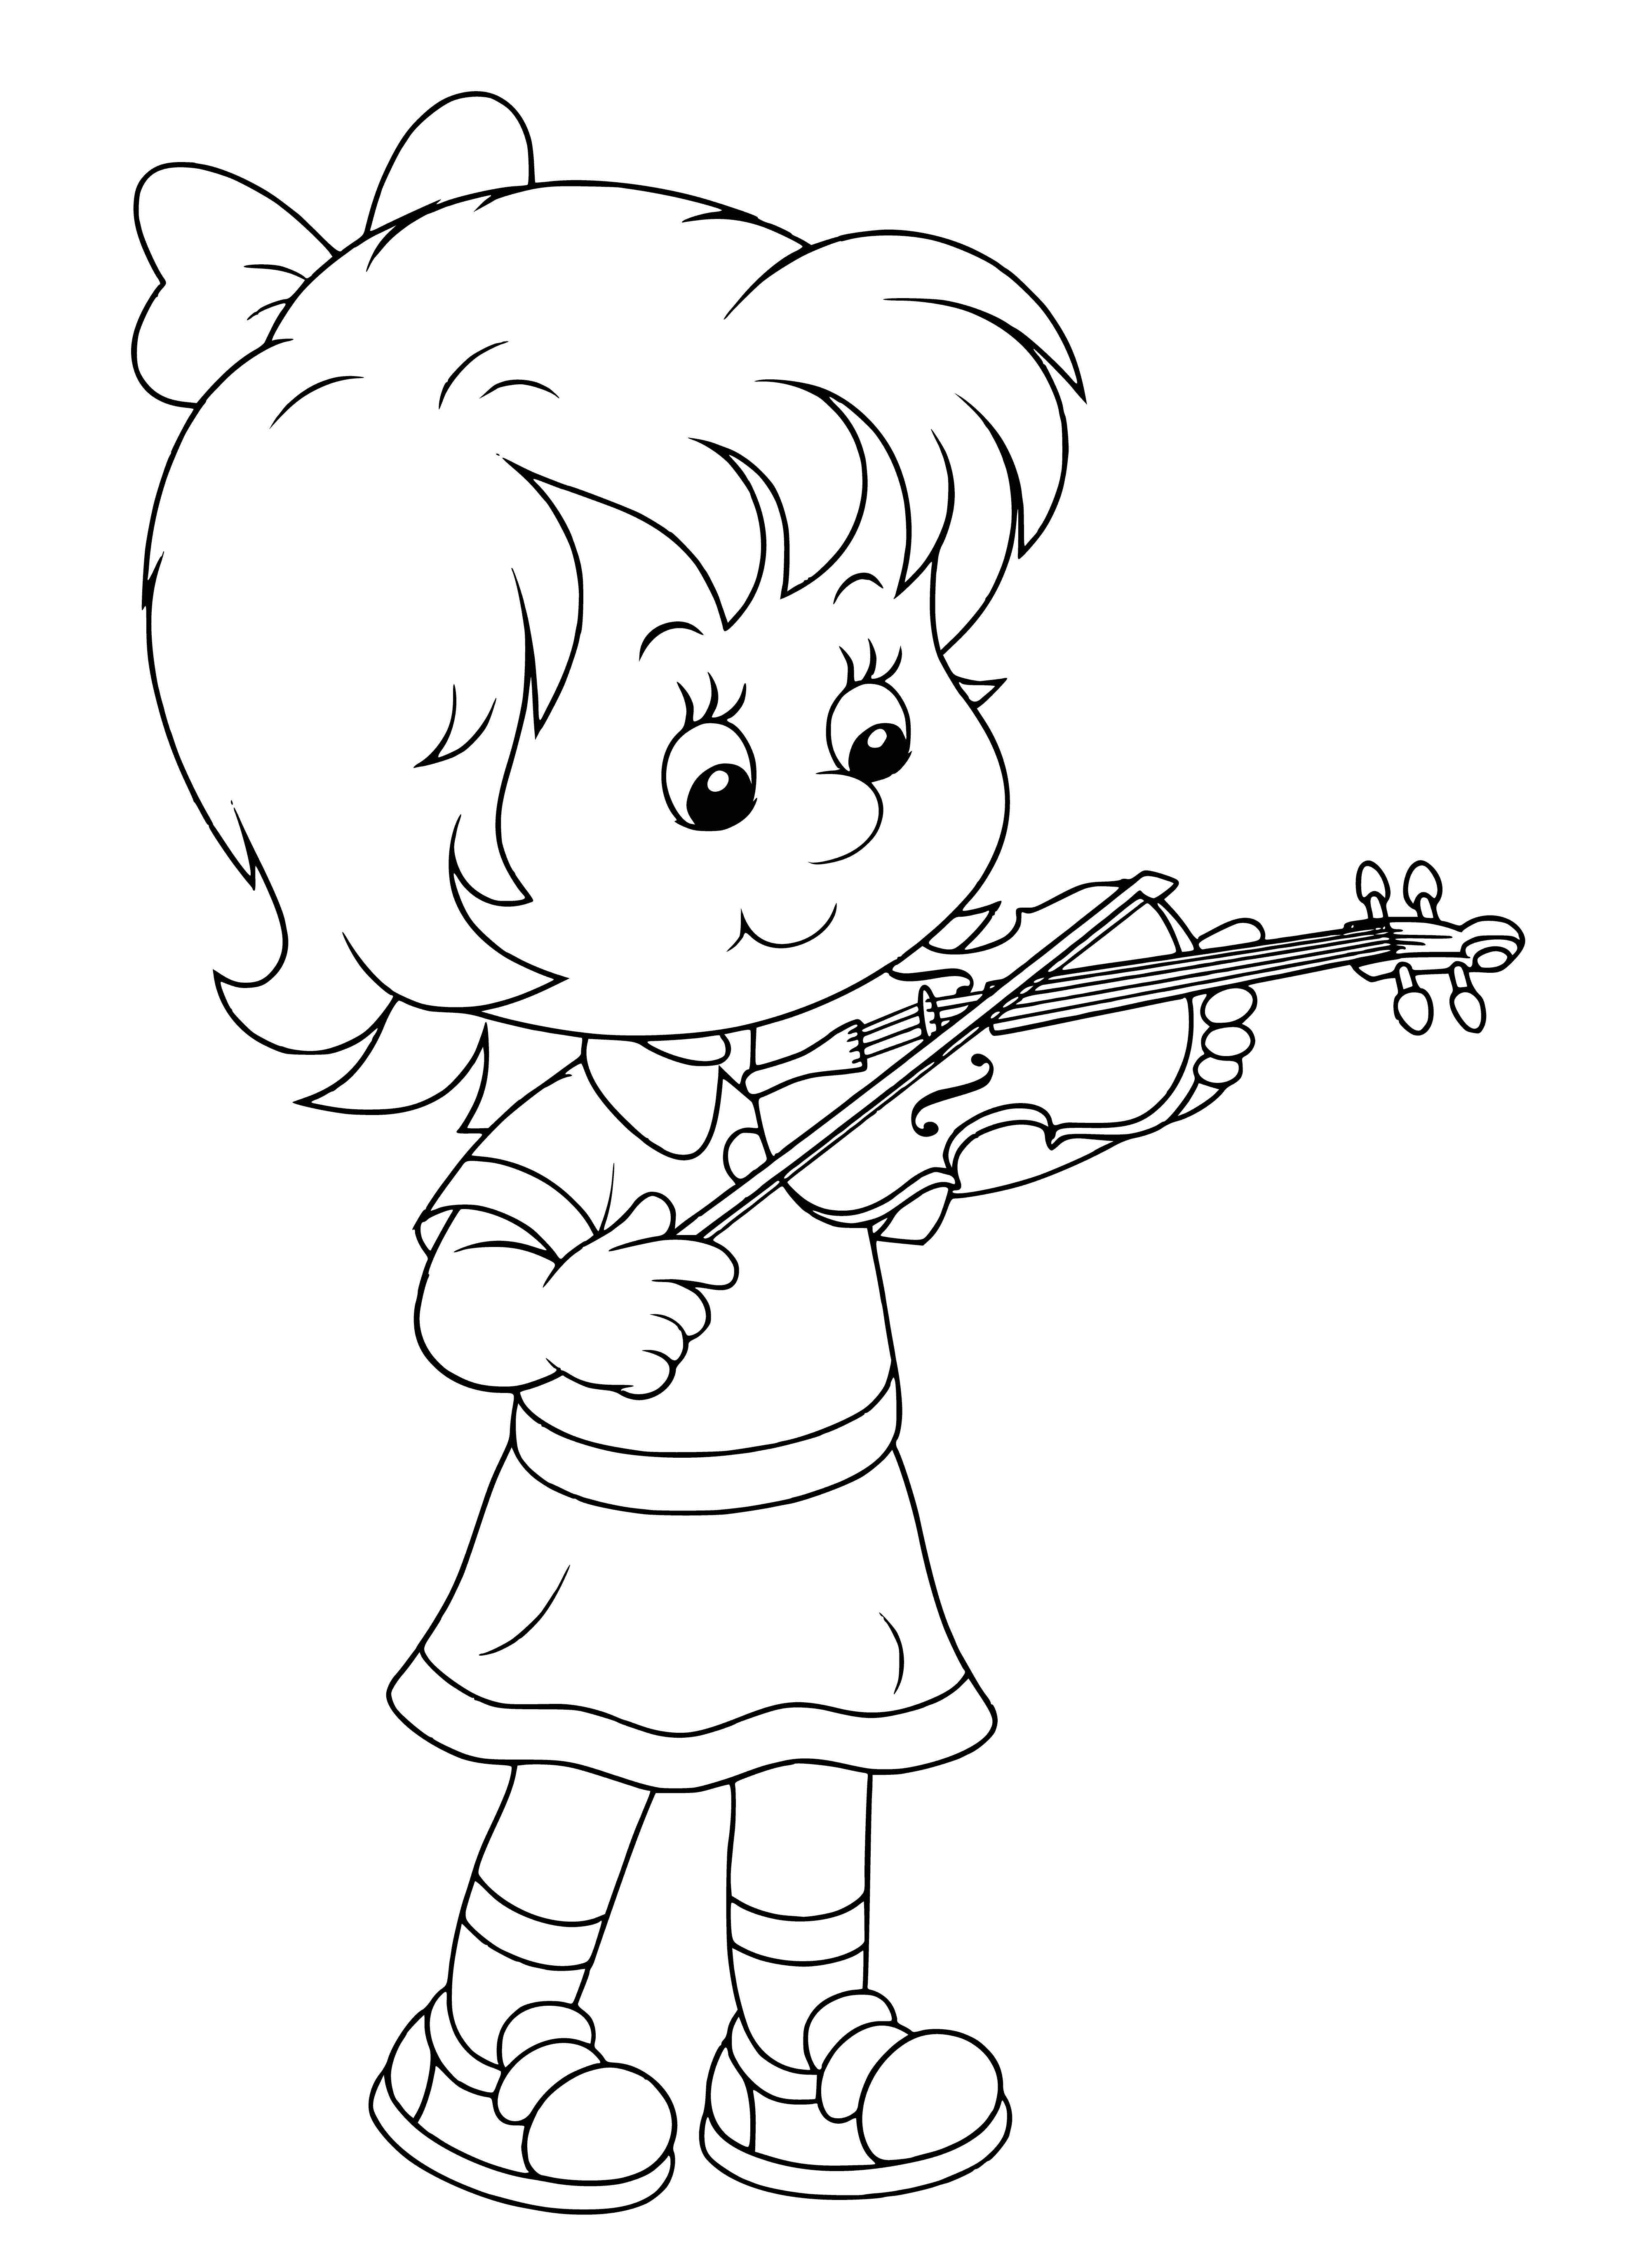 coloring page: Boy is happily learning to play piano w/ smiling teacher at his side.